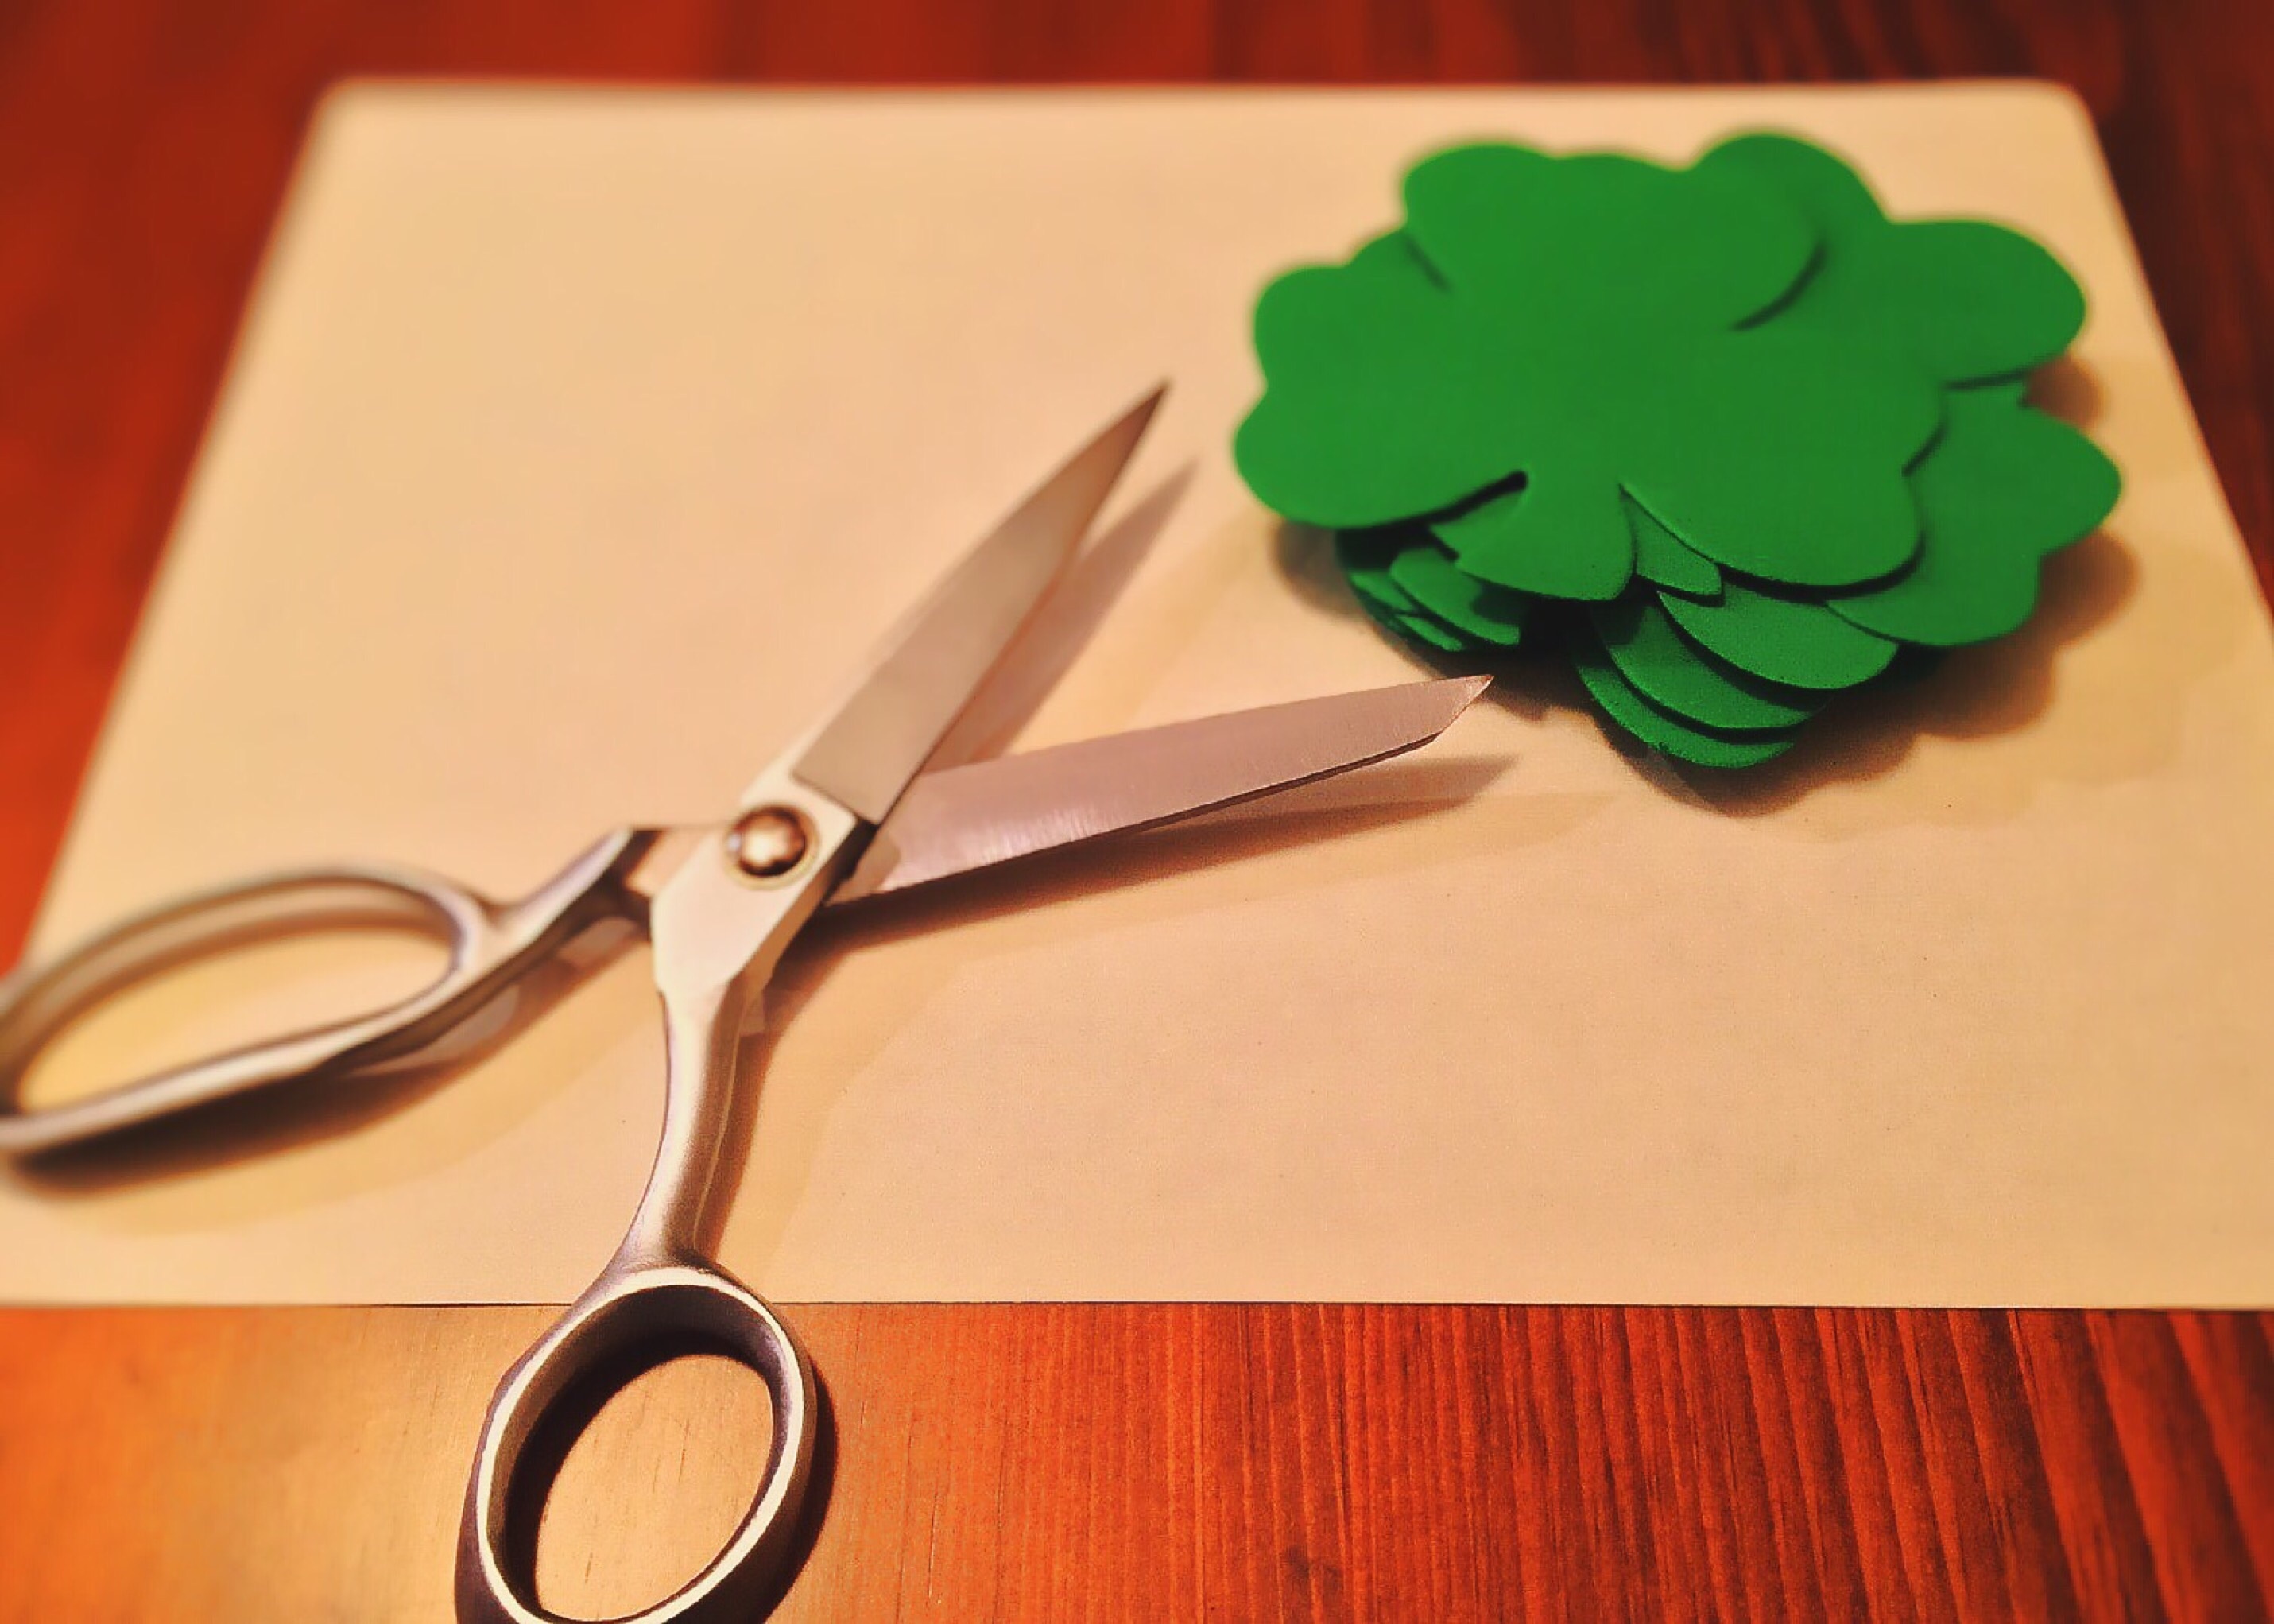 scissors beside the clover cut-out leaves